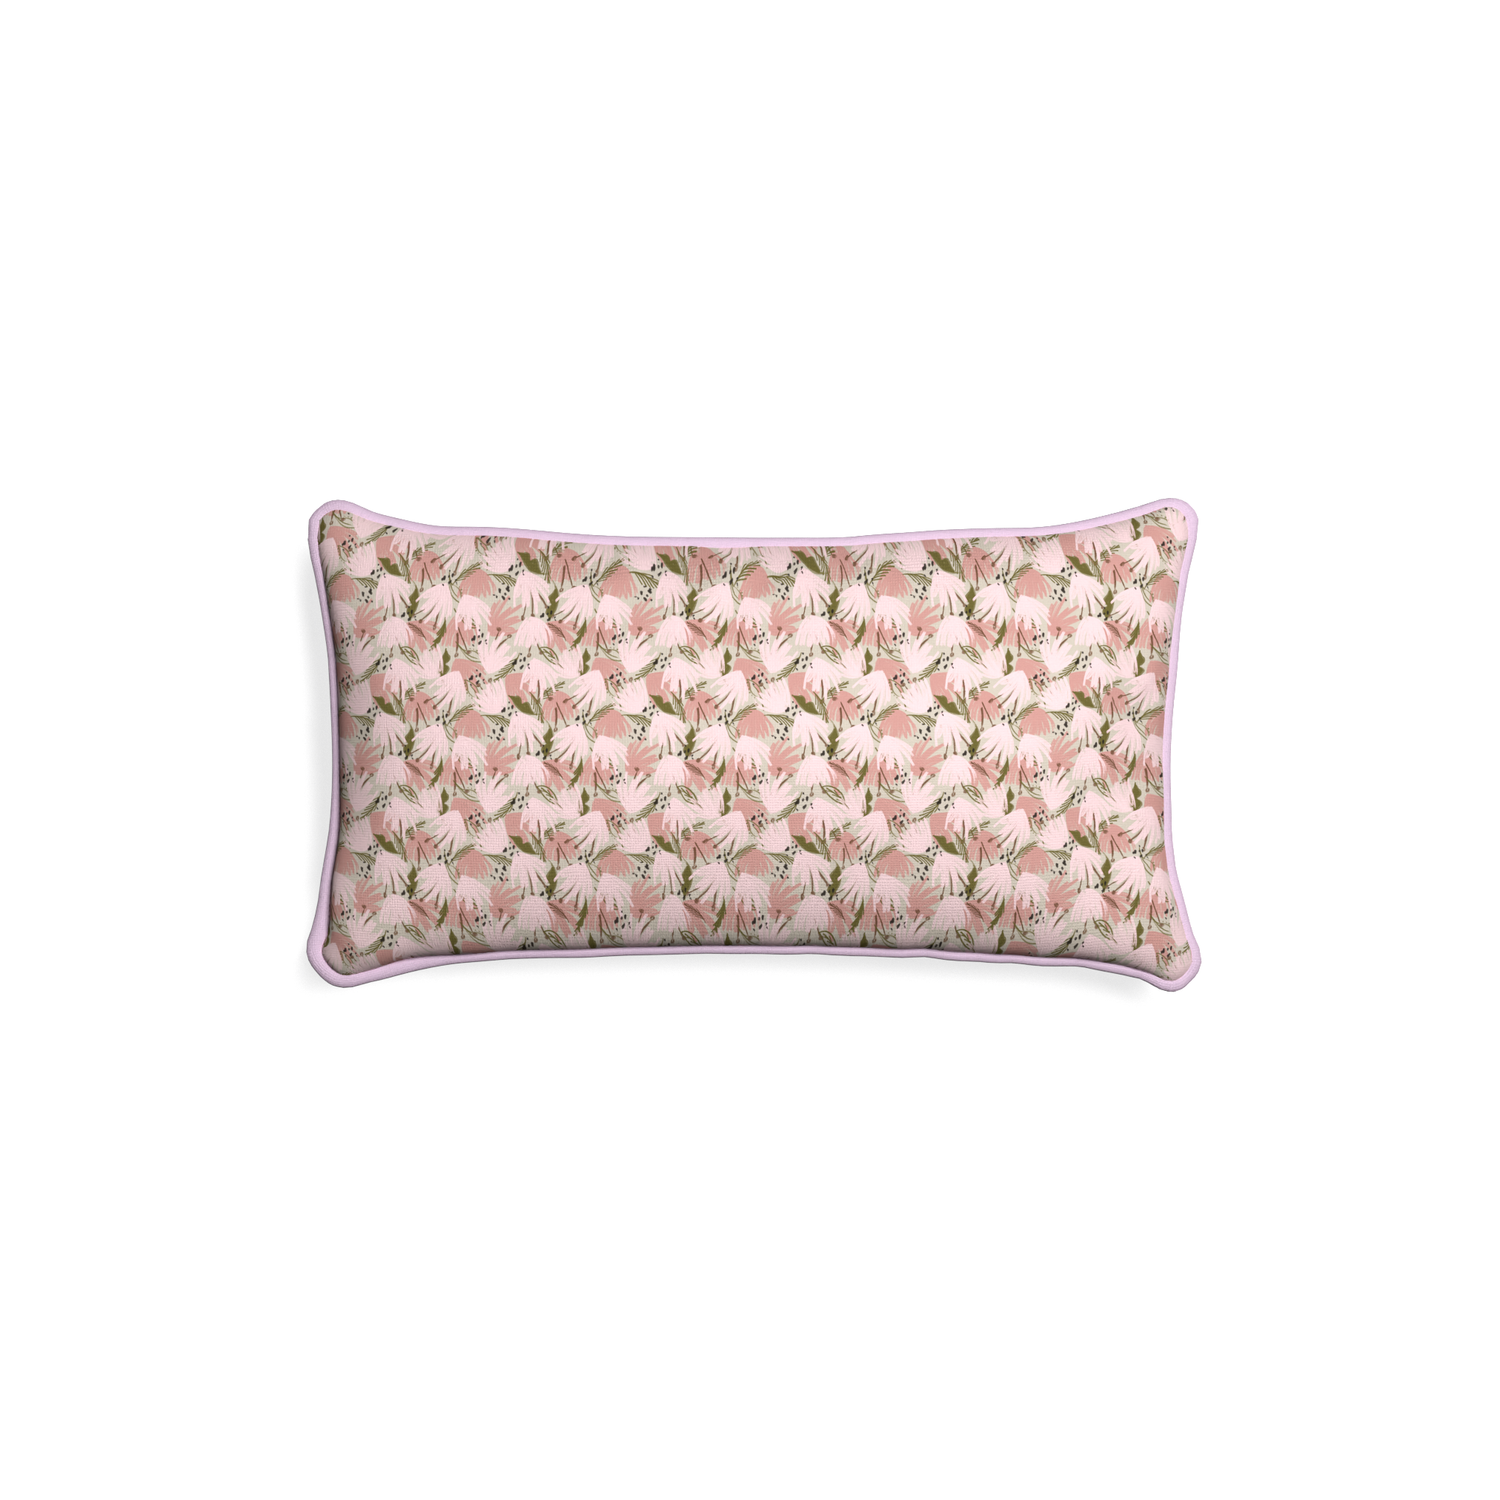 Petite-lumbar eden pink custom pink floralpillow with l piping on white background